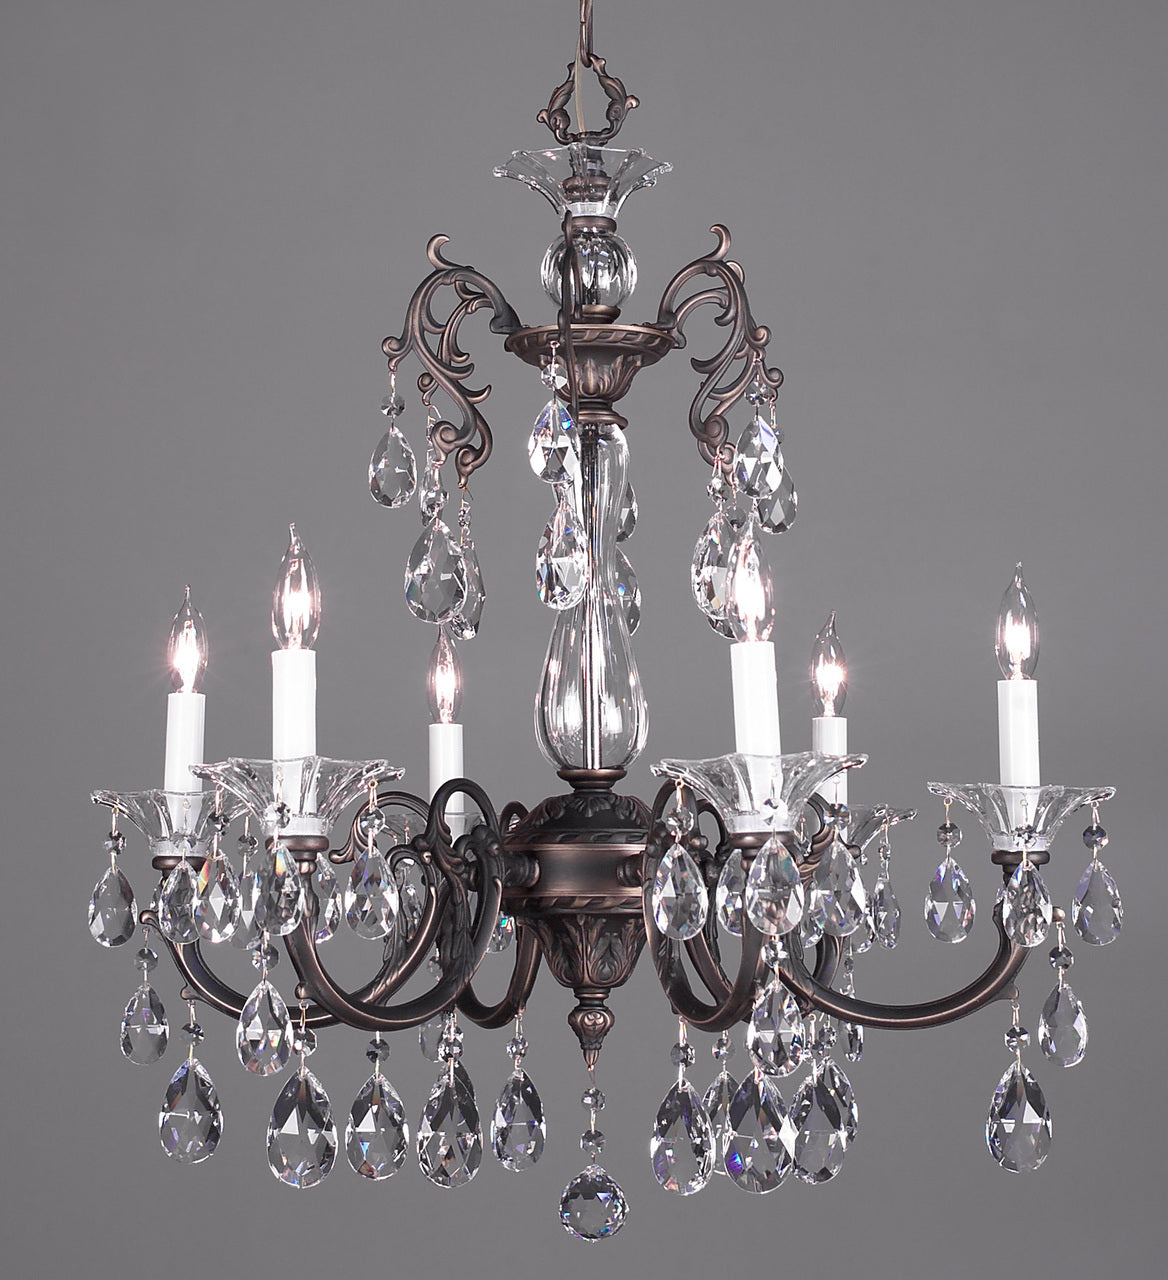 Classic Lighting 57056 SS CBK Via Lombardi Crystal Chandelier in Silverstone (Imported from Spain)